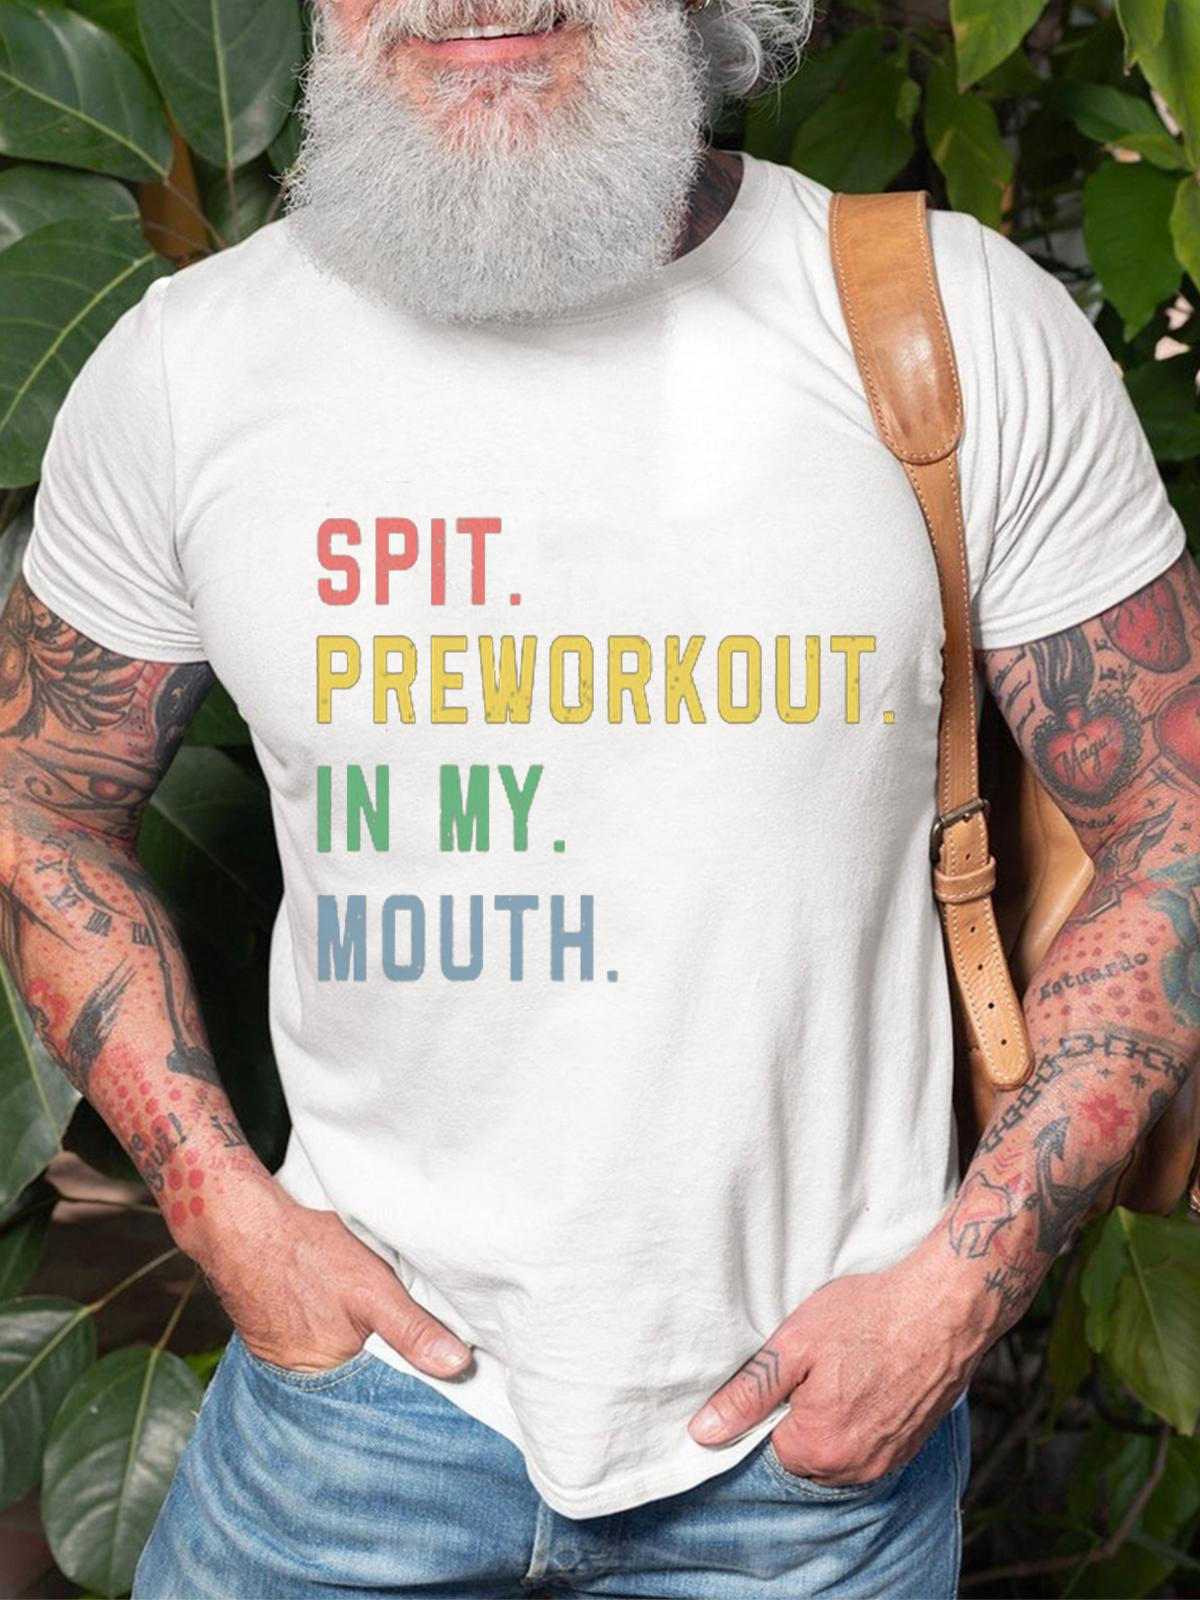 SPIT PREWORKOUT IN MY MOUTH Round Neck Short Sleeve Men's T-shirt